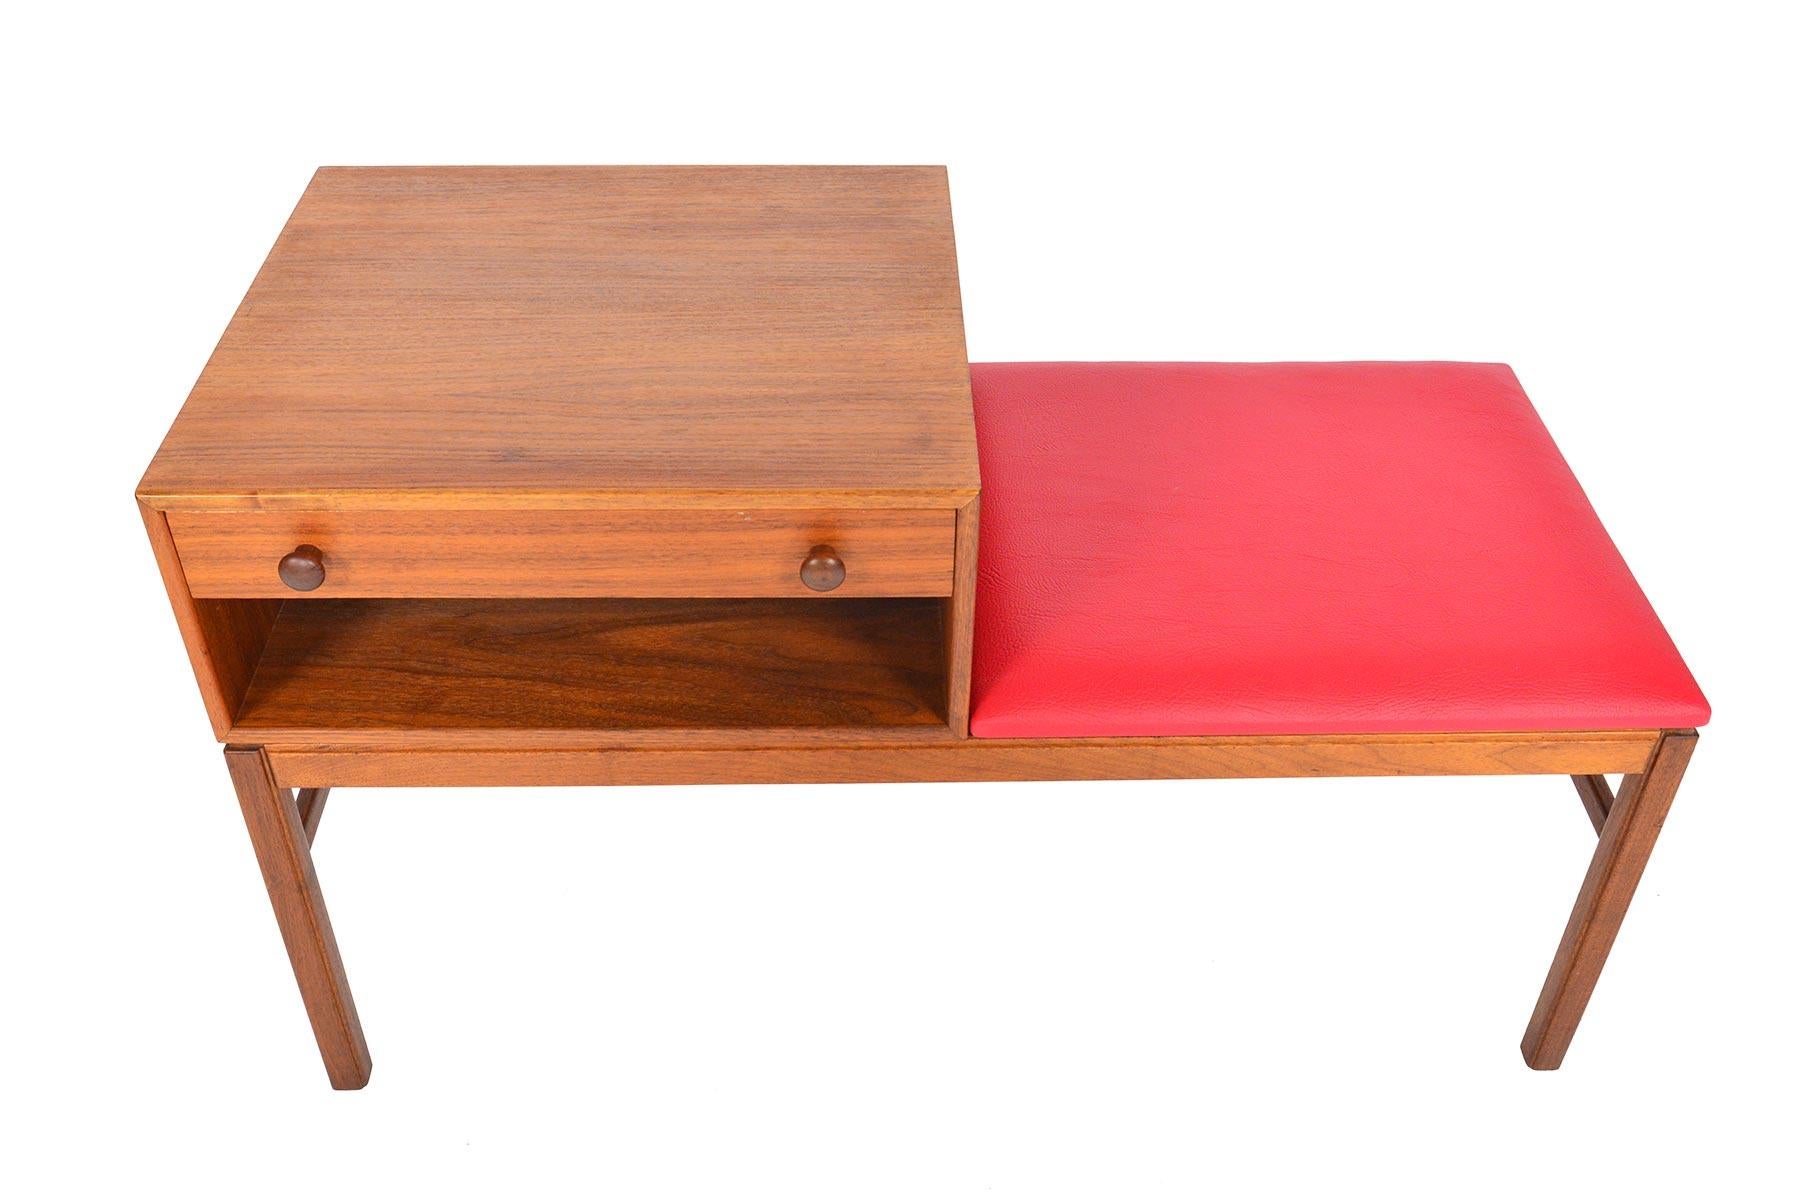 This exceptional Swedish modern “Casino” model telephone bench in teak was designed by Sven Engström & Gunnar Myrstrand for Tingströms, Bra Bohag in the 1960s. This large bench offers a removable case with a single drawer and is nestled next to the